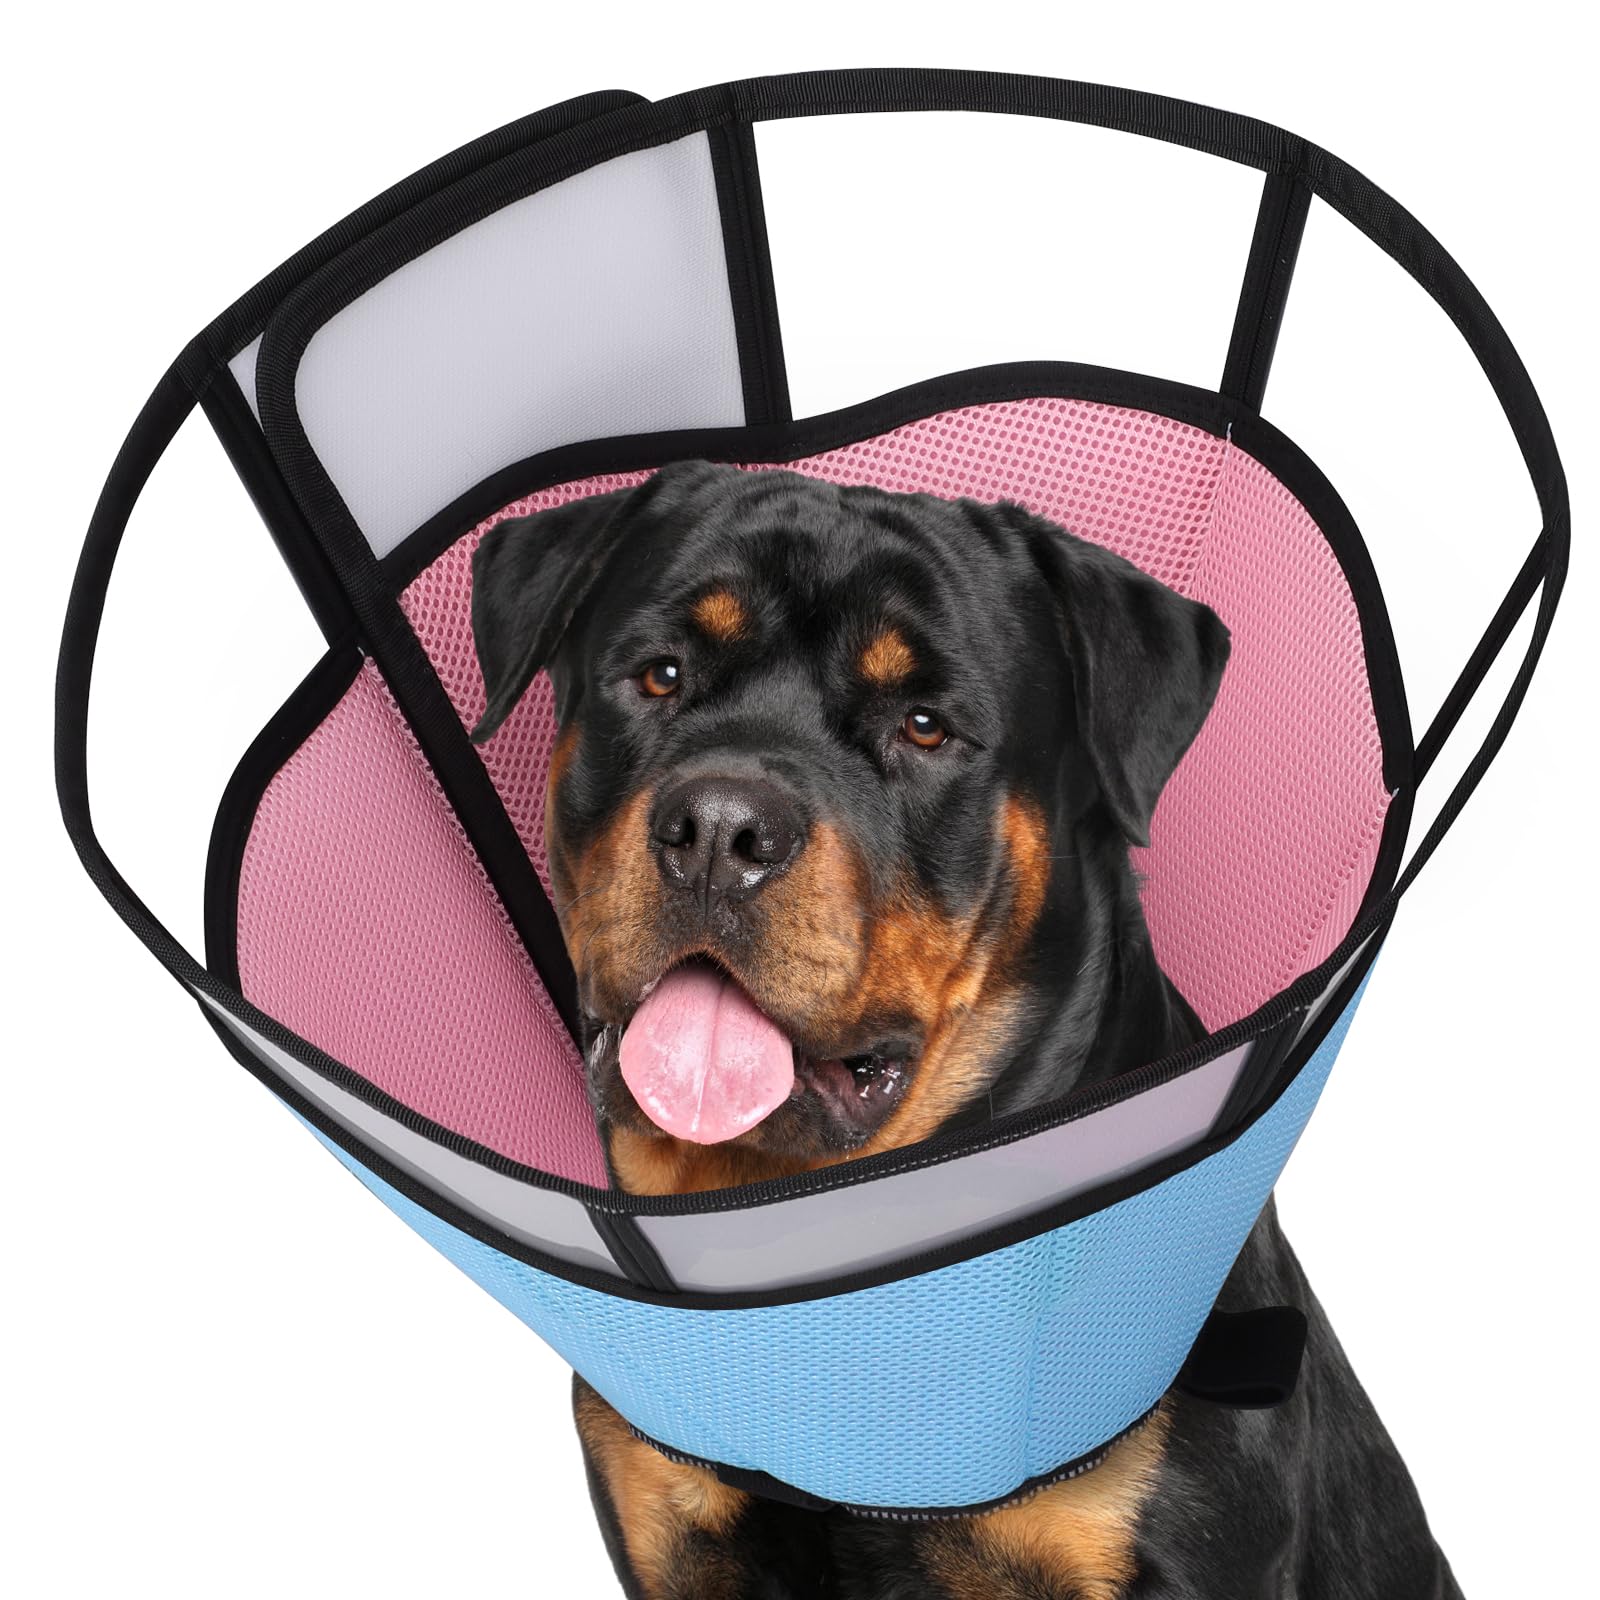 Dog Cone for Surgery Recovery - Comfortable and Protective Cone for Dogs